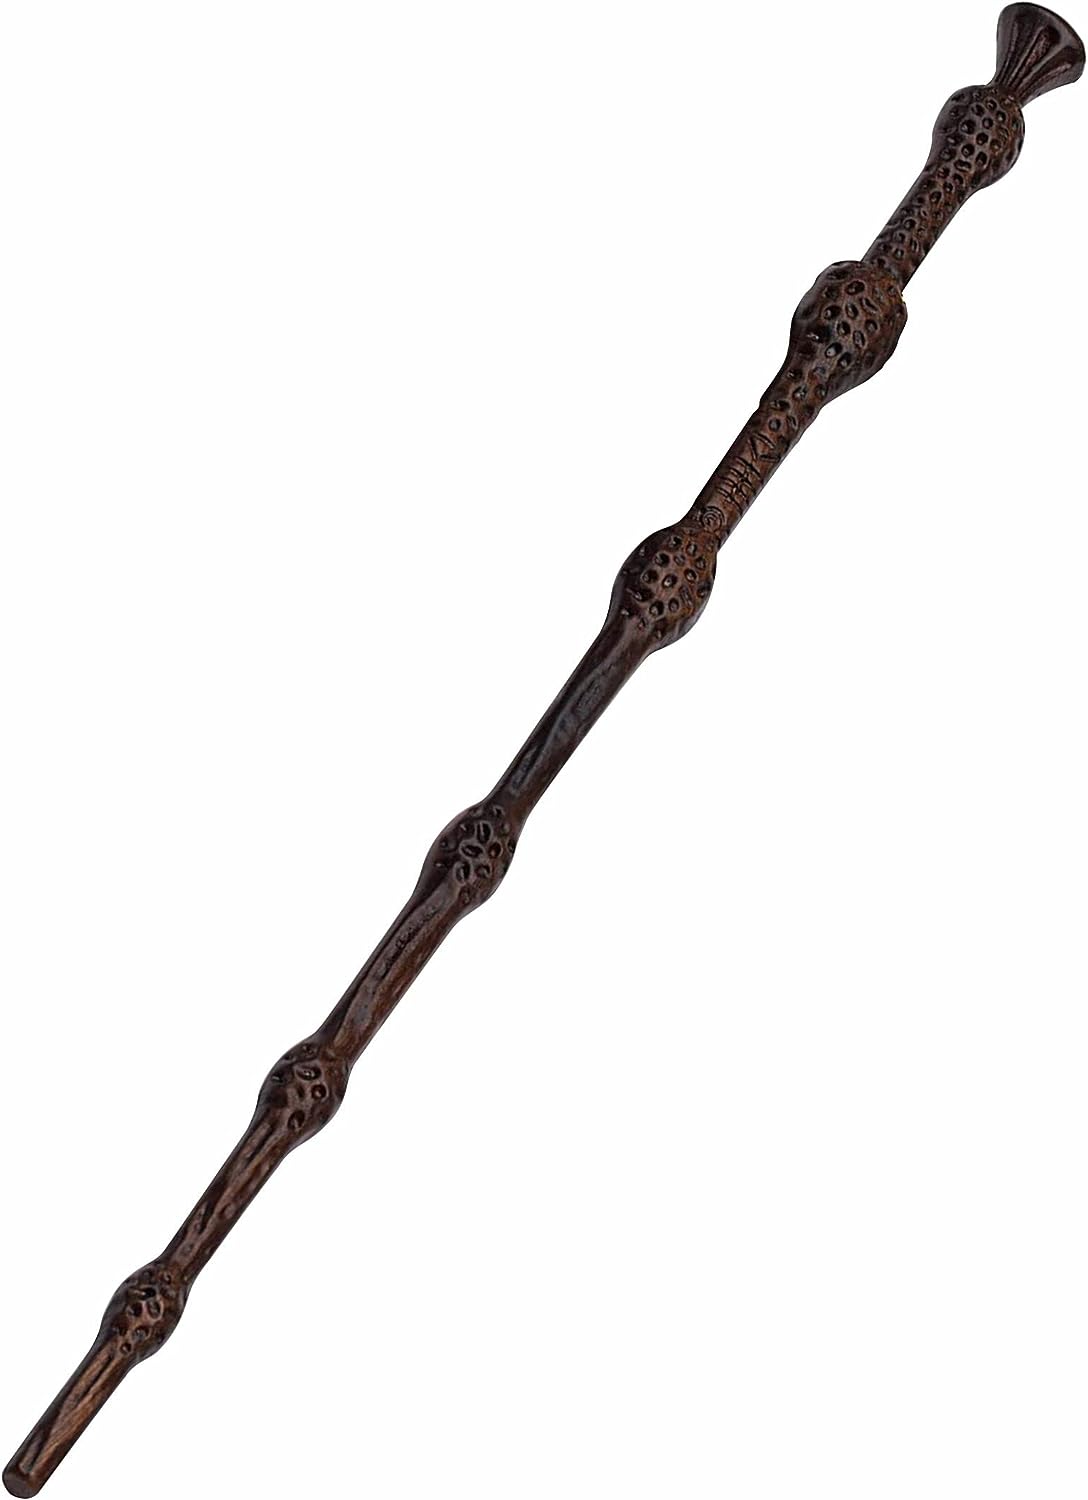 Handicraftviet - Hand Carved Wooden Magic Wands for Wizards/Collectible Cosplay Magical Gift for Halloween, Christmas and Birthday Party, 15 inch (S3)